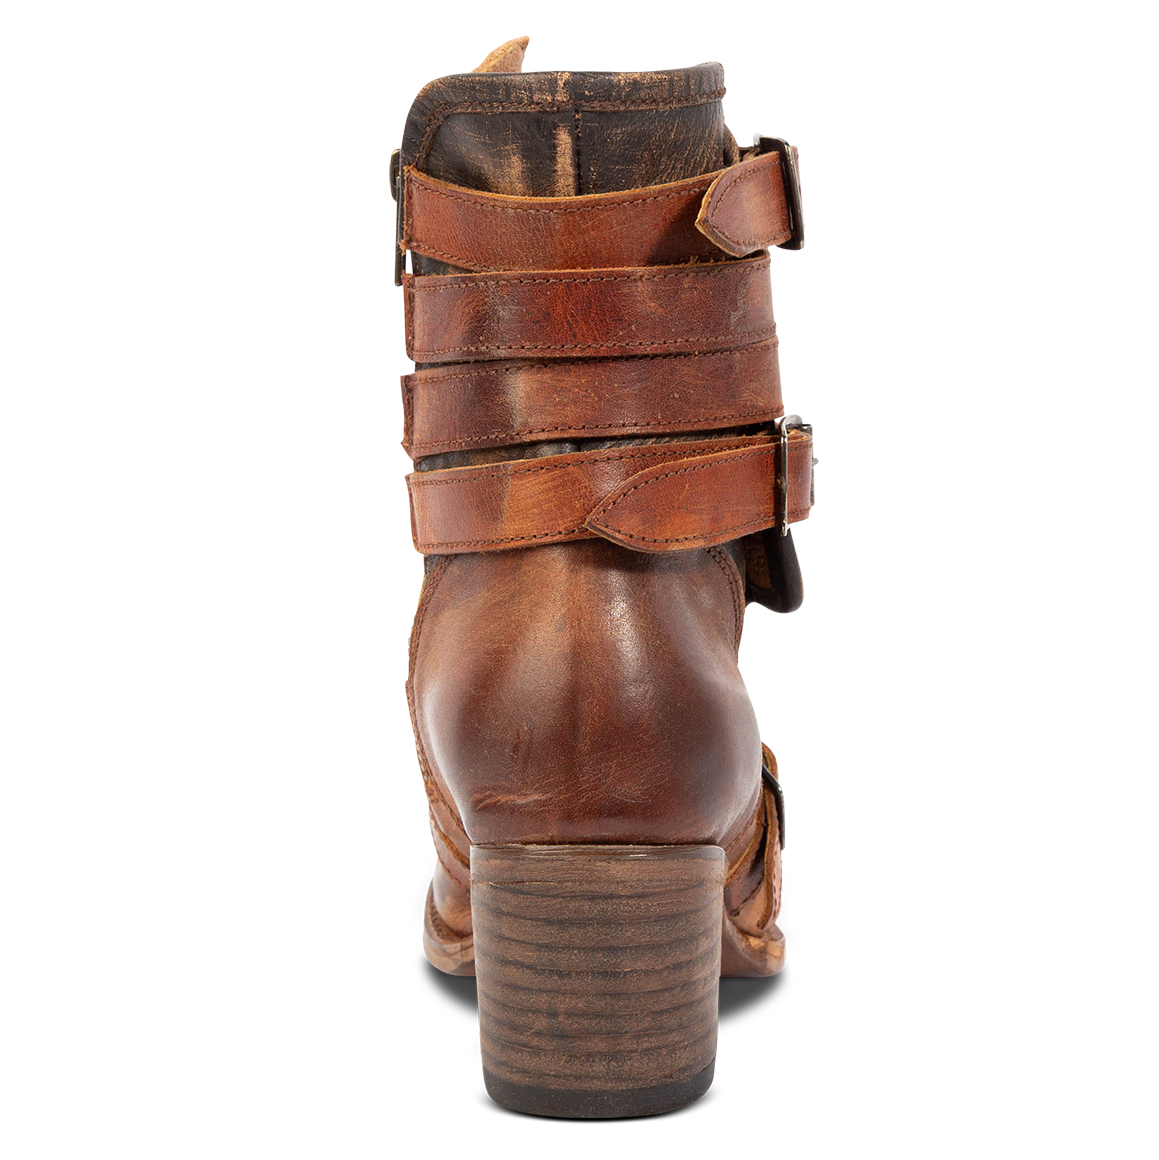 Back view showing block heel and leather straps on Freebird women's Darlin cognac leather bootie